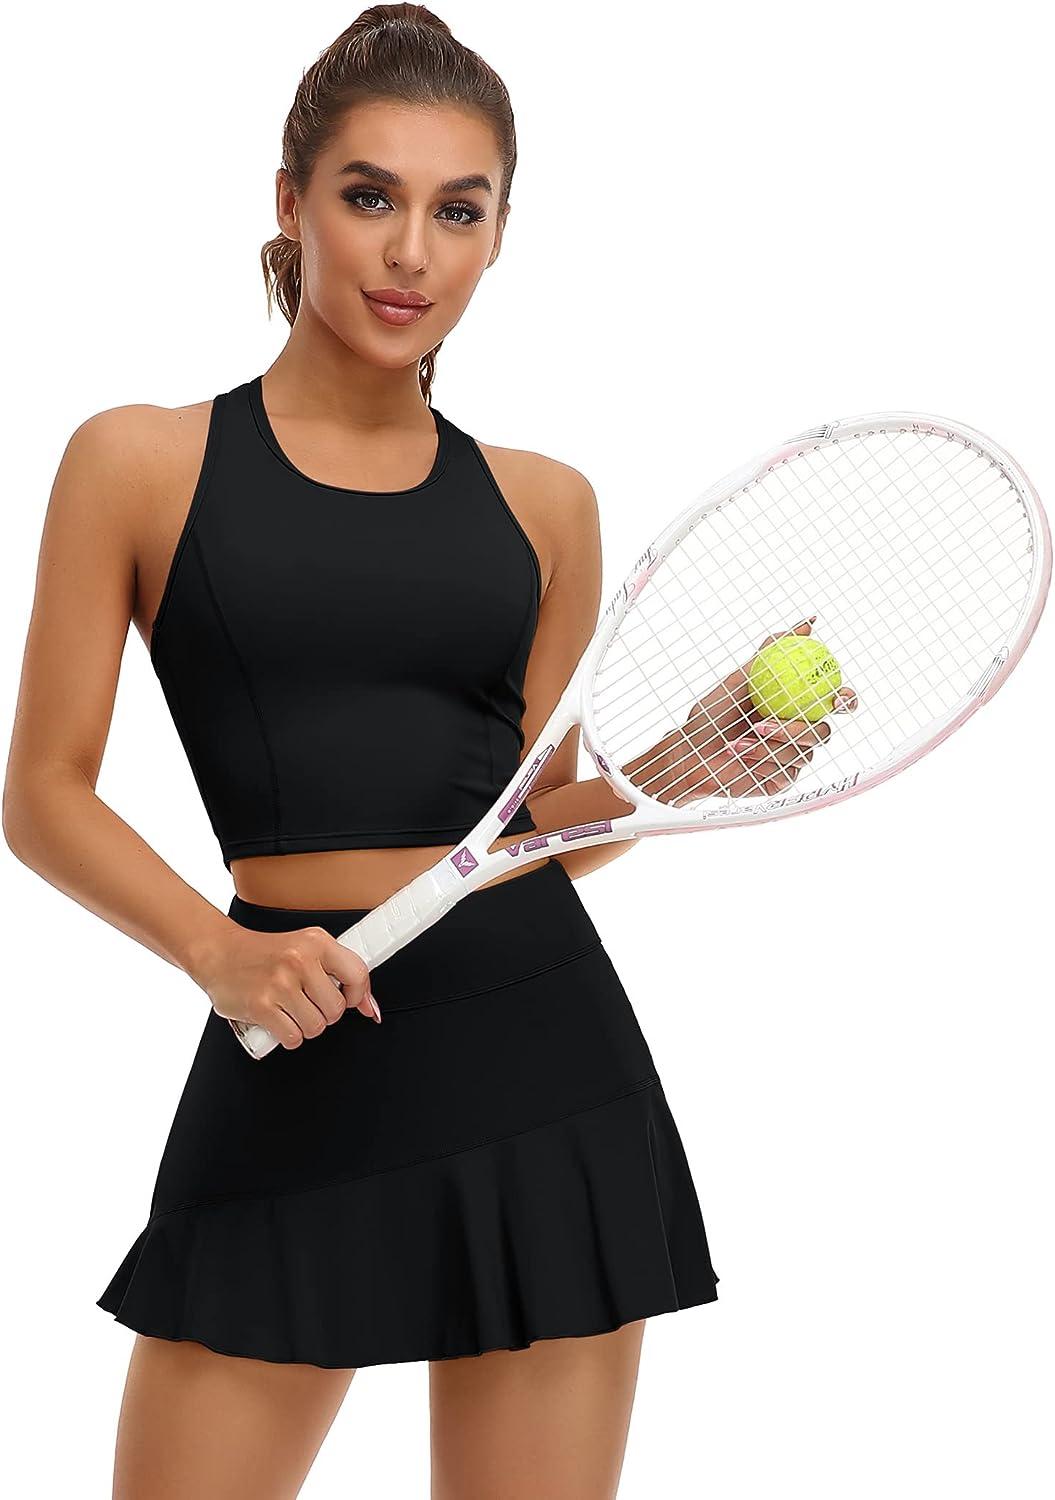 ATTRACO 2 Piece Tennis Dresses for Women Athletic Workout Dress with Shorts  and Pockets #2 Black Medium